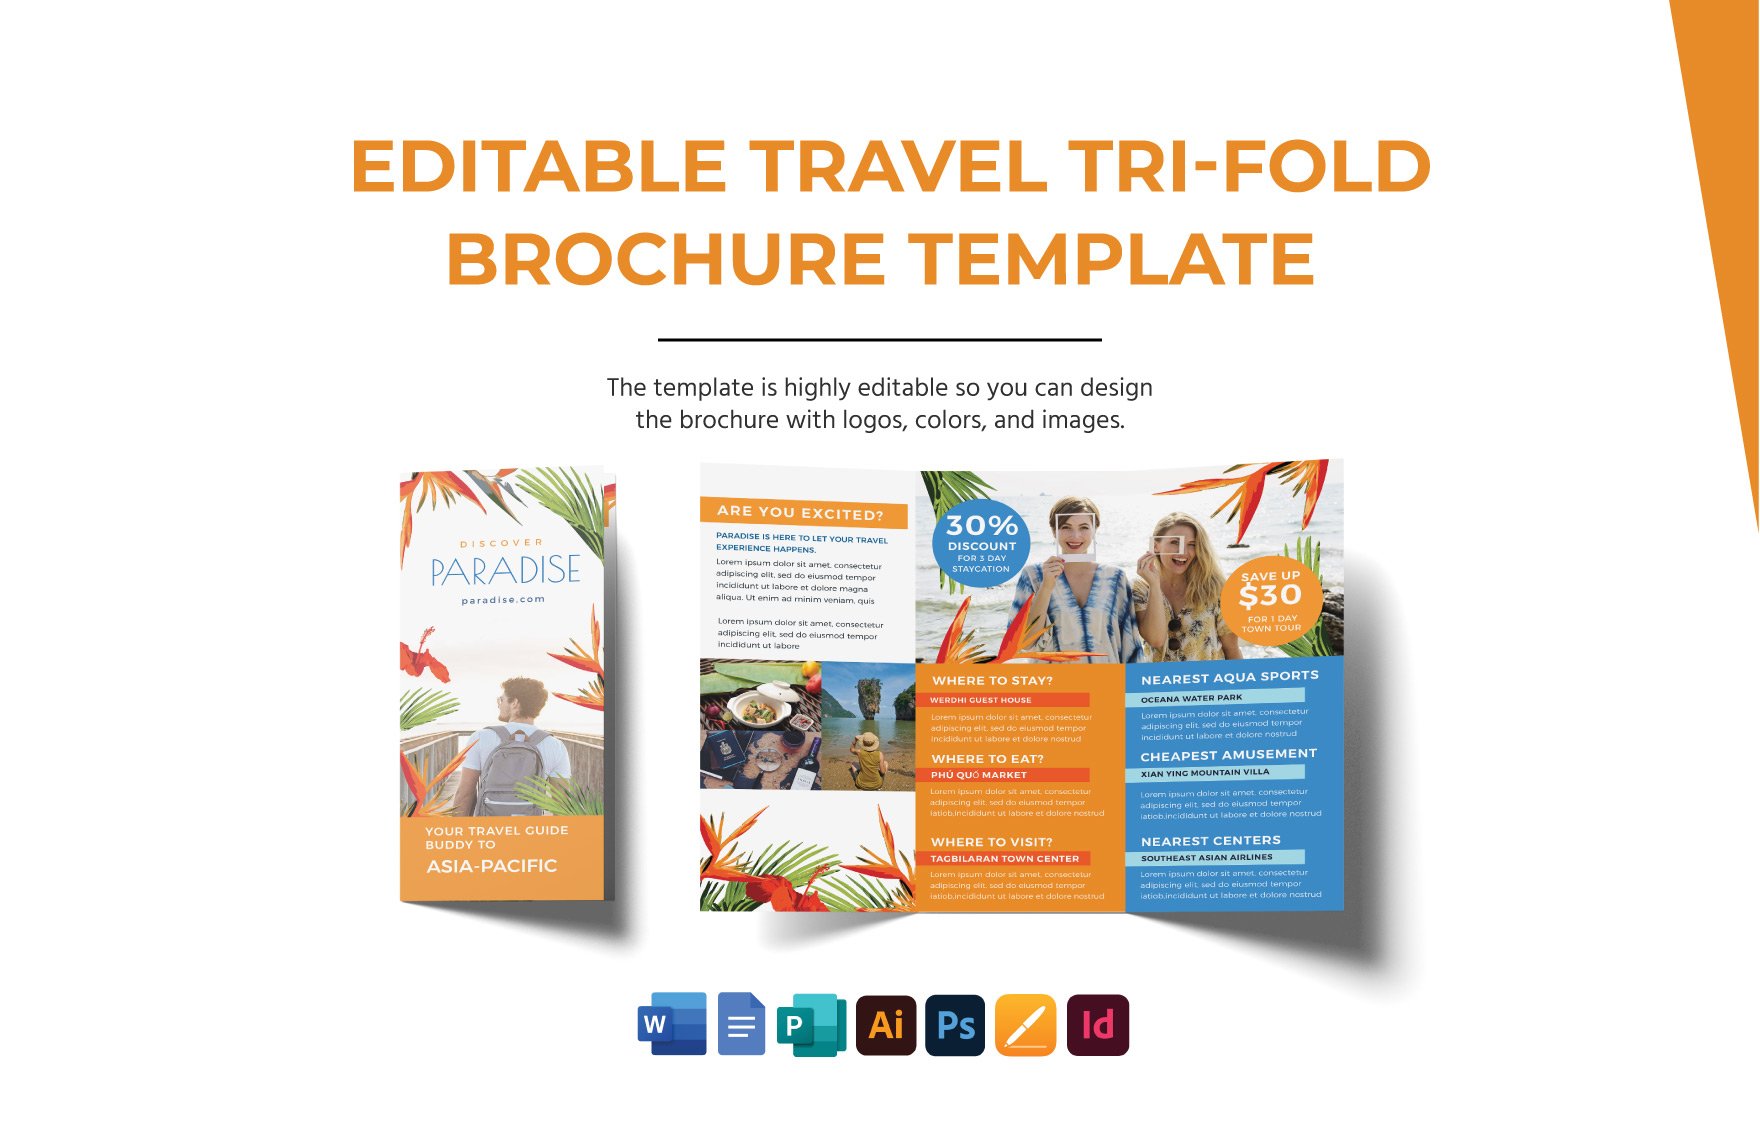 Editable Travel Tri-Fold Brochure Template in Word, Google Docs, Illustrator, PSD, Apple Pages, Publisher, InDesign